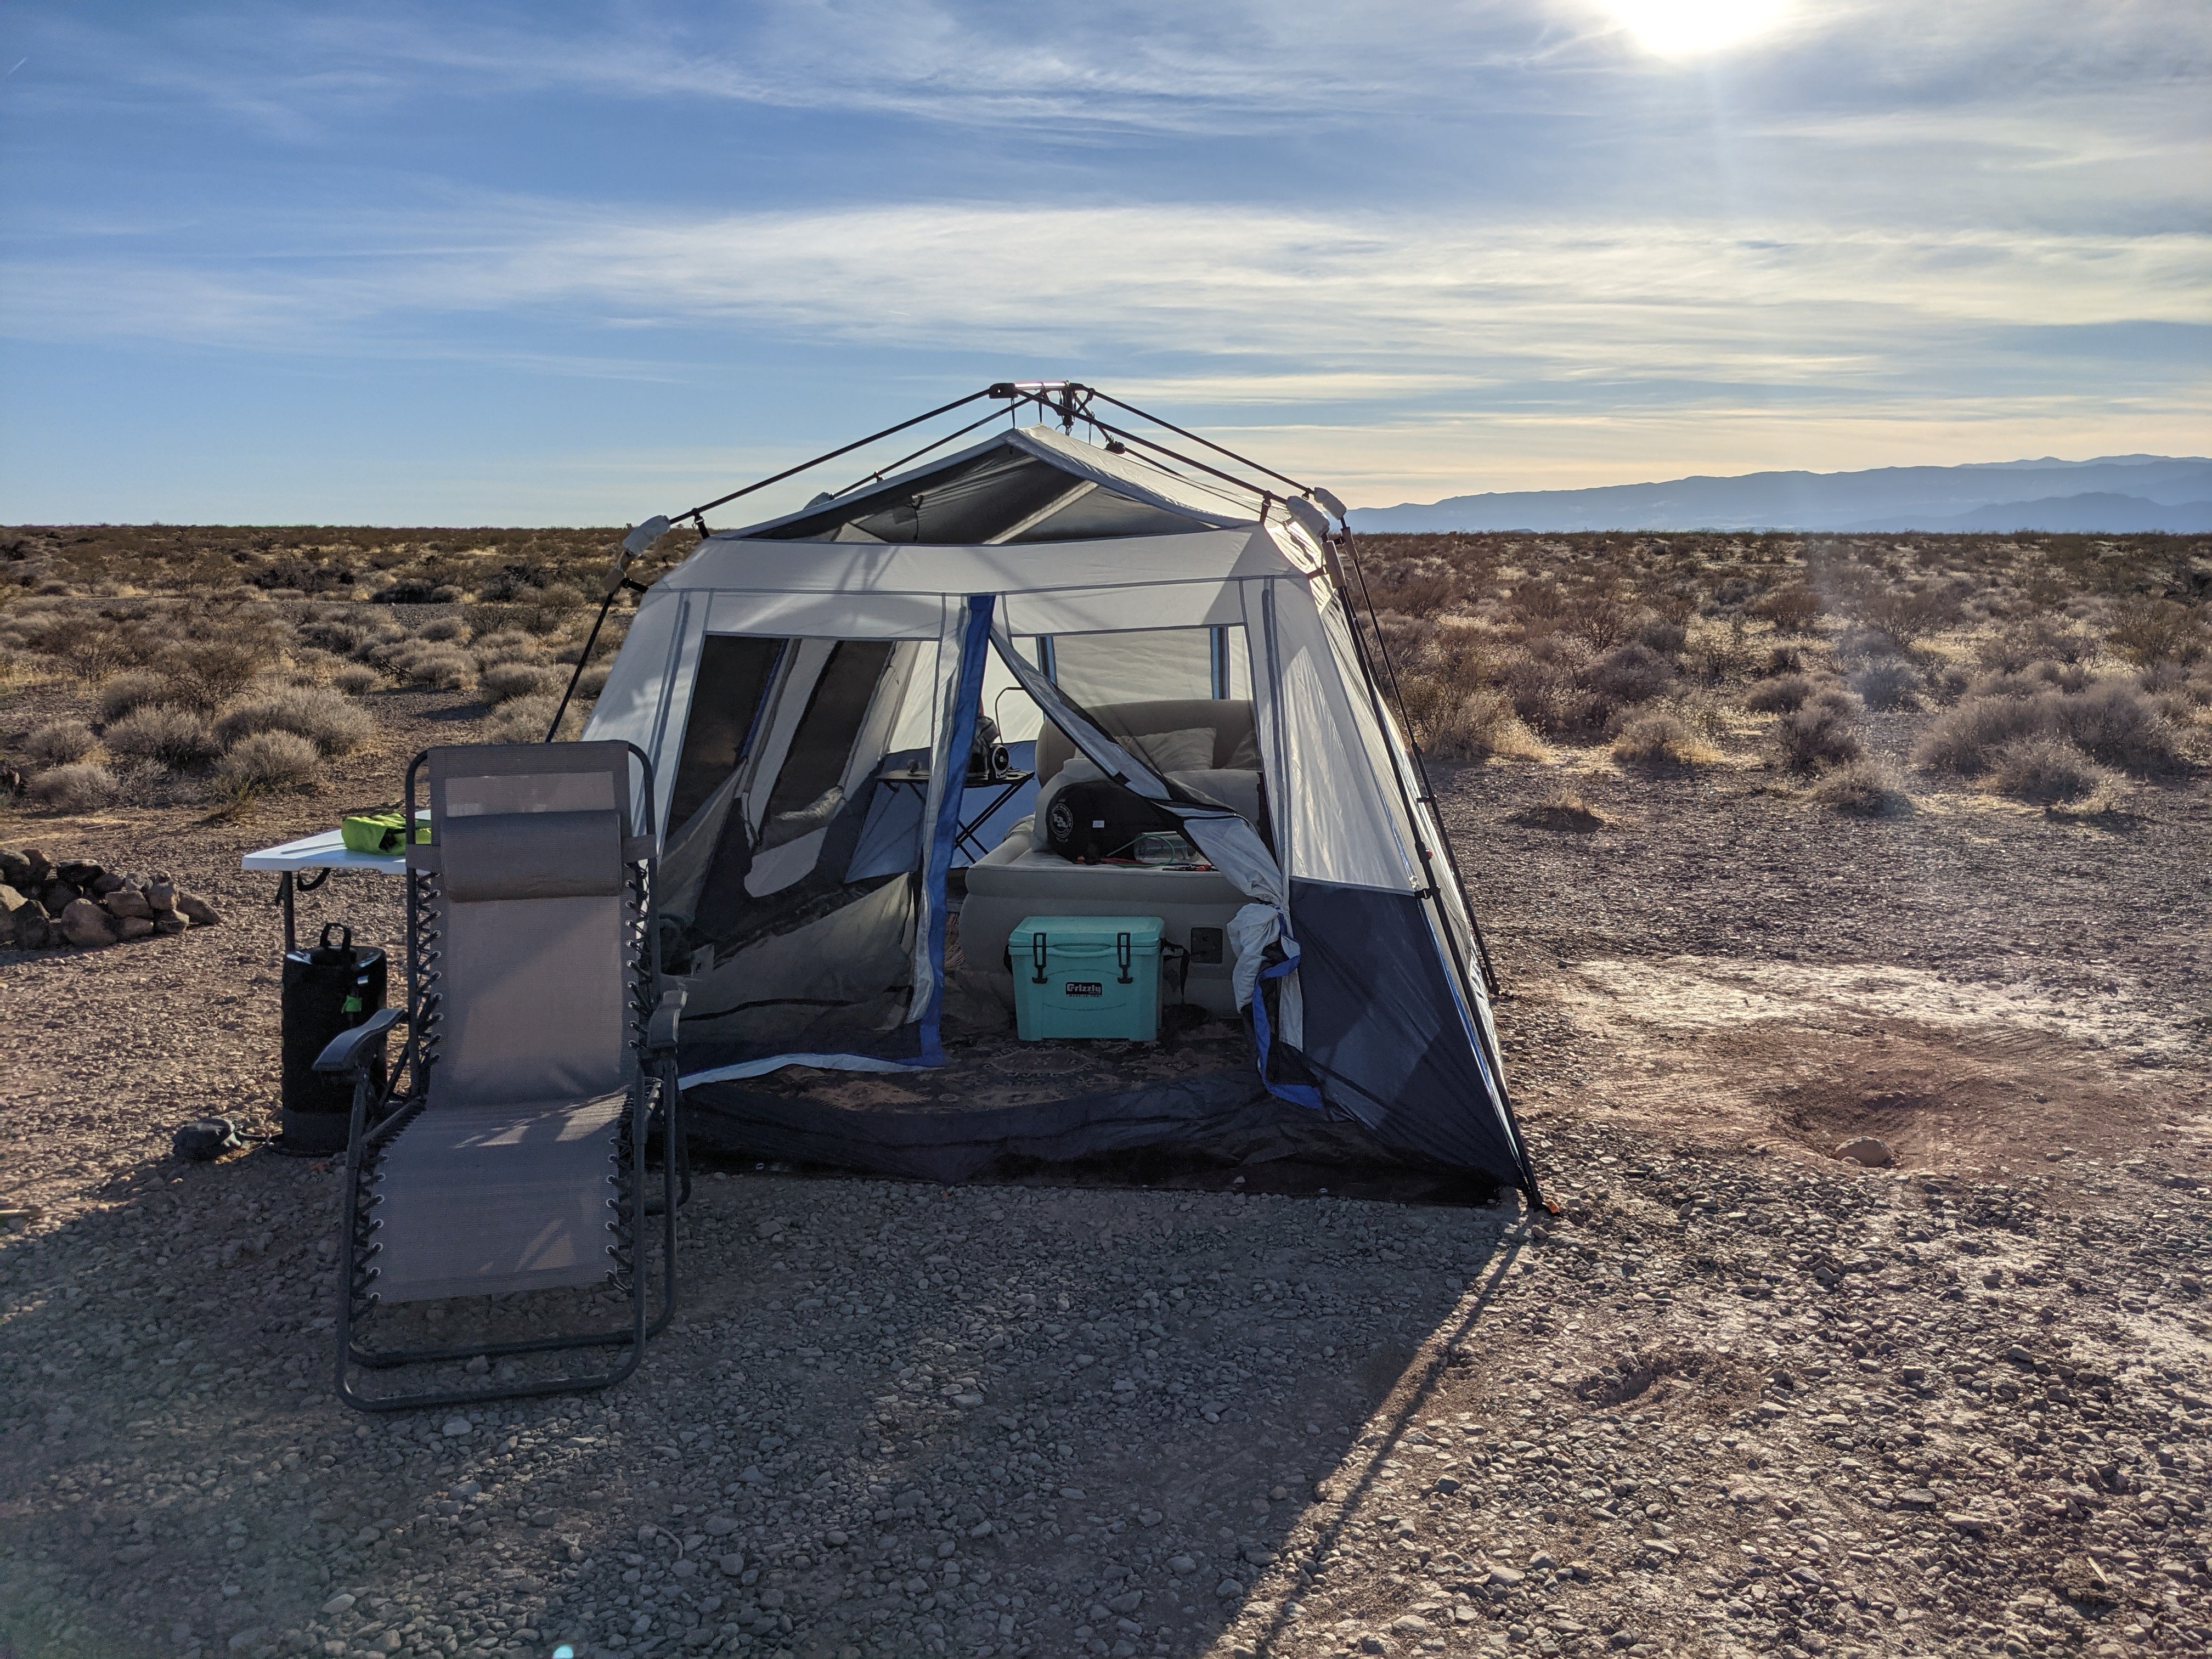 Camper submitted image from BLM dispersed camping west of Valley of Fire - 4